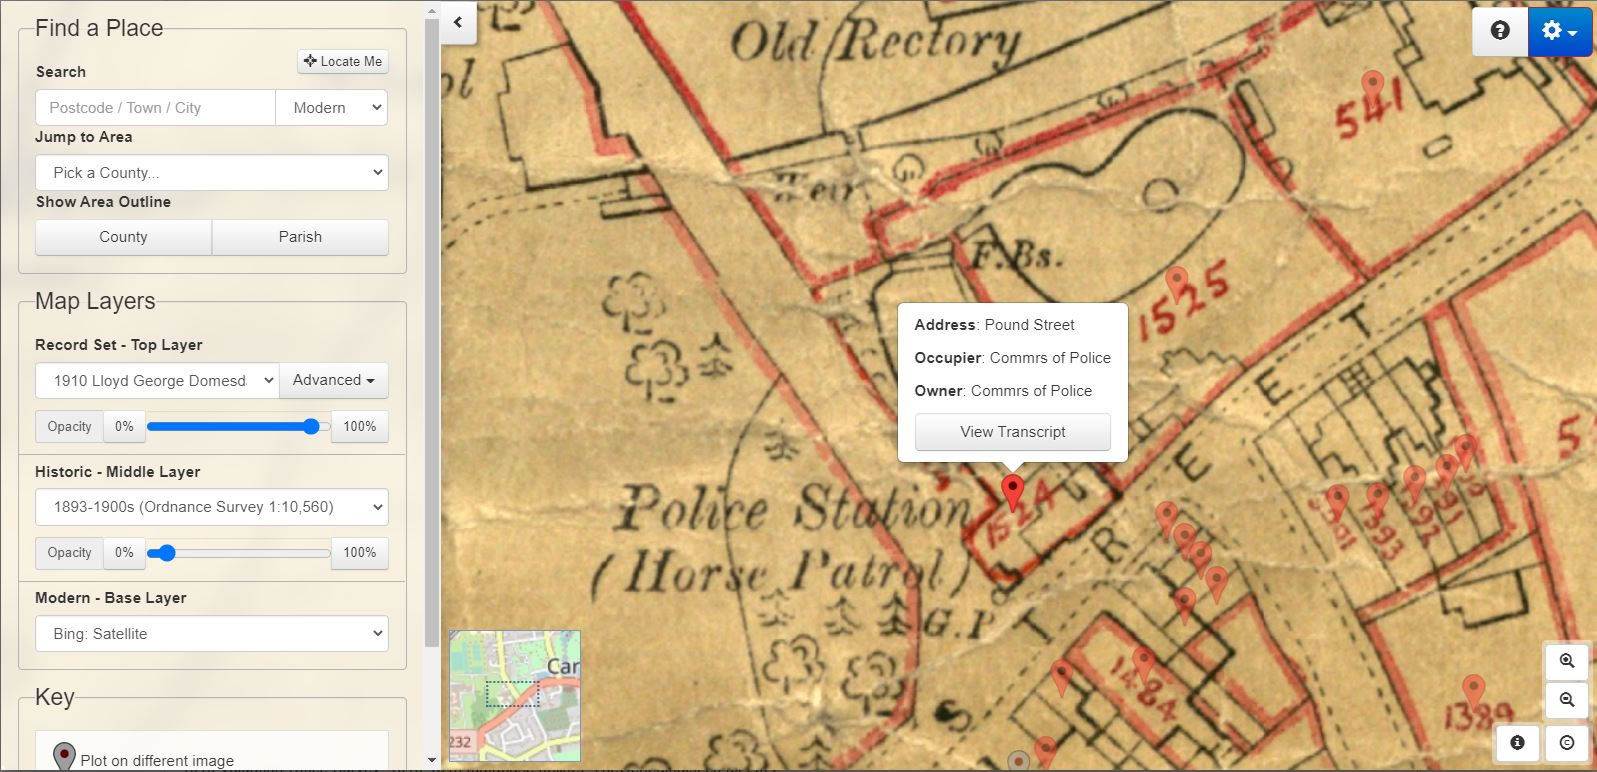 A Police Station on the large scale Ordnance Survey Map used in the Lloyd George Domesday Survey and identified by a pin on TheGenealogist's Map Explorer